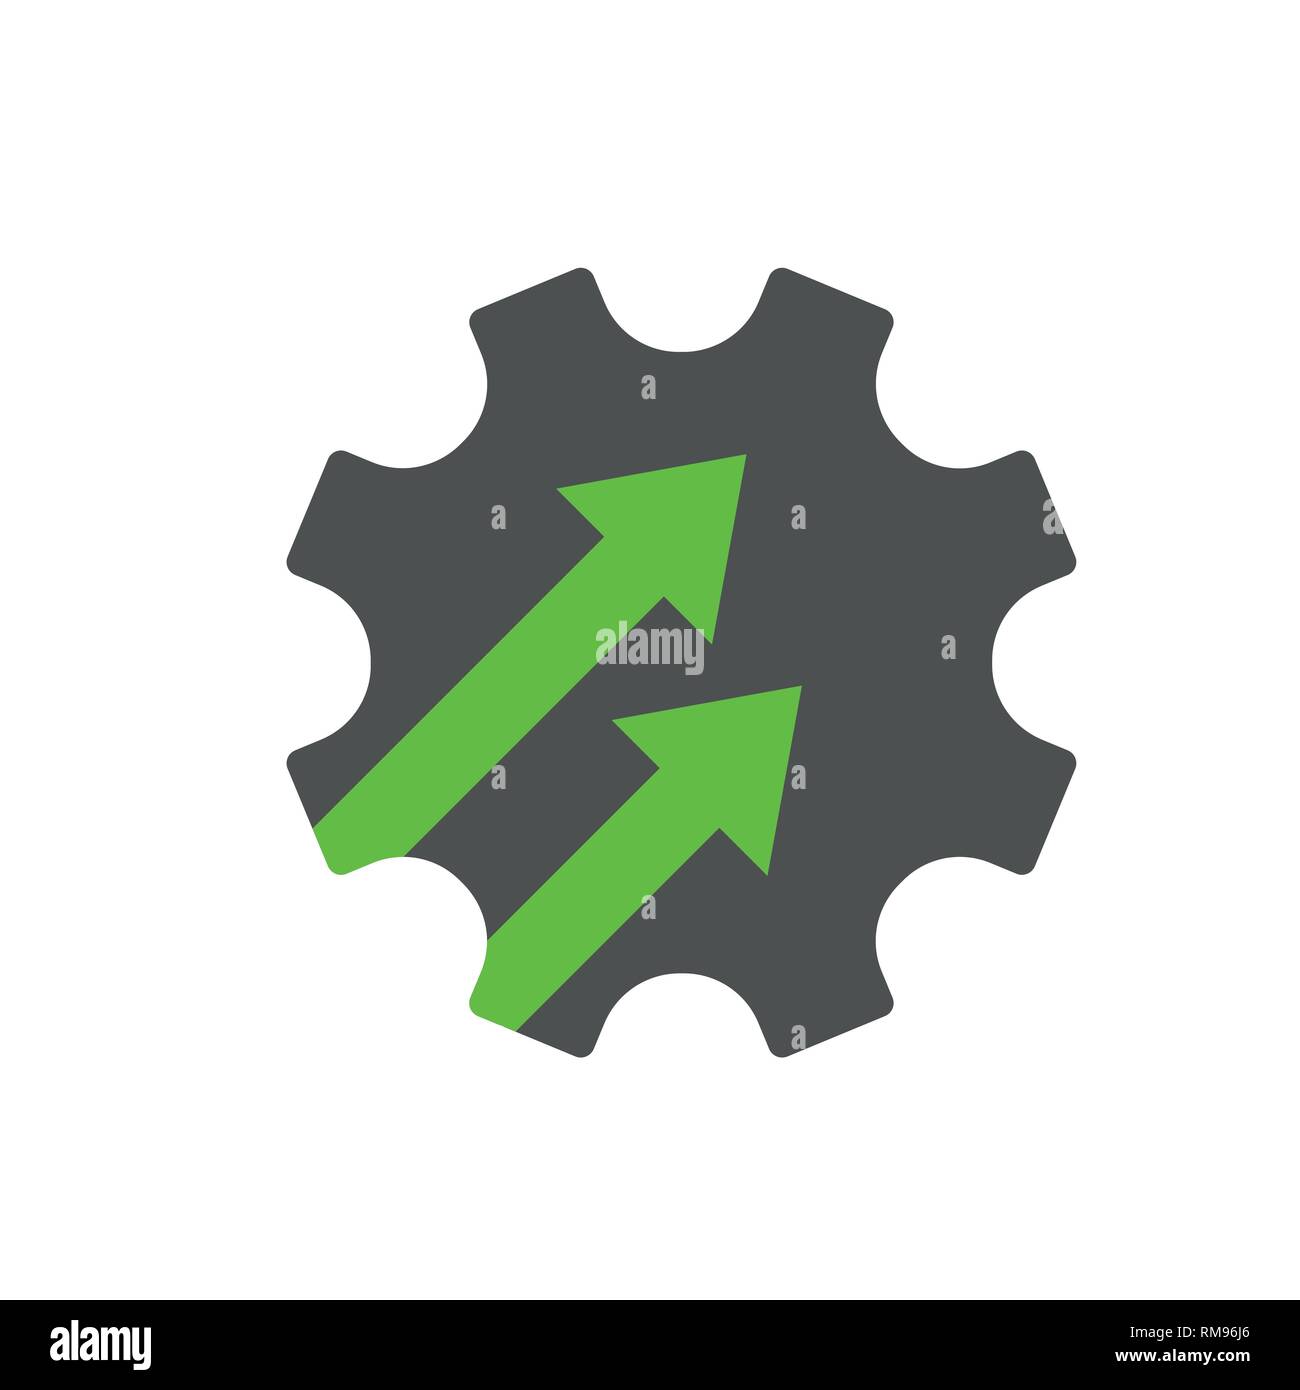 Industry 4.0 gear icon vector illustration. Cogwheel sign INDUSTRY 4.0, manufacturing technology revolution with digital system. EPS 10 Stock Vector